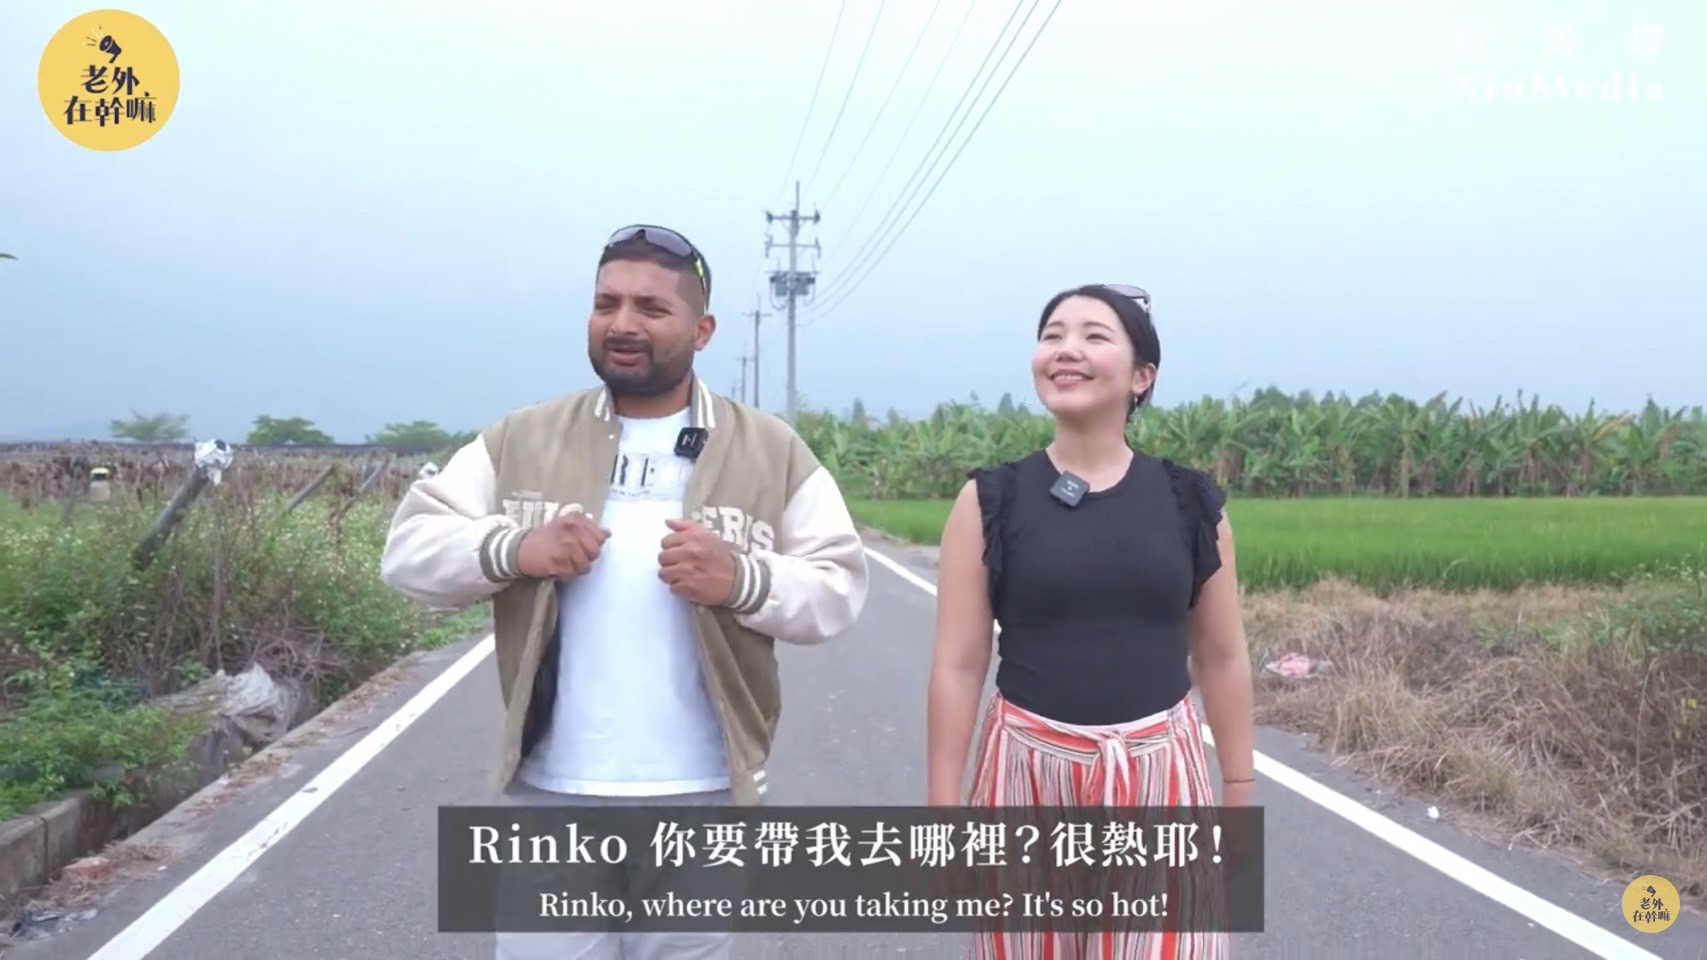 New Immigrants, Boris and Rinko from laowaizaiganma (老外在幹嘛) YouTube Channel experience the most authentic Taiwanese flavor in Yunlin.  Photo provided & authorized by：老外在幹嘛 